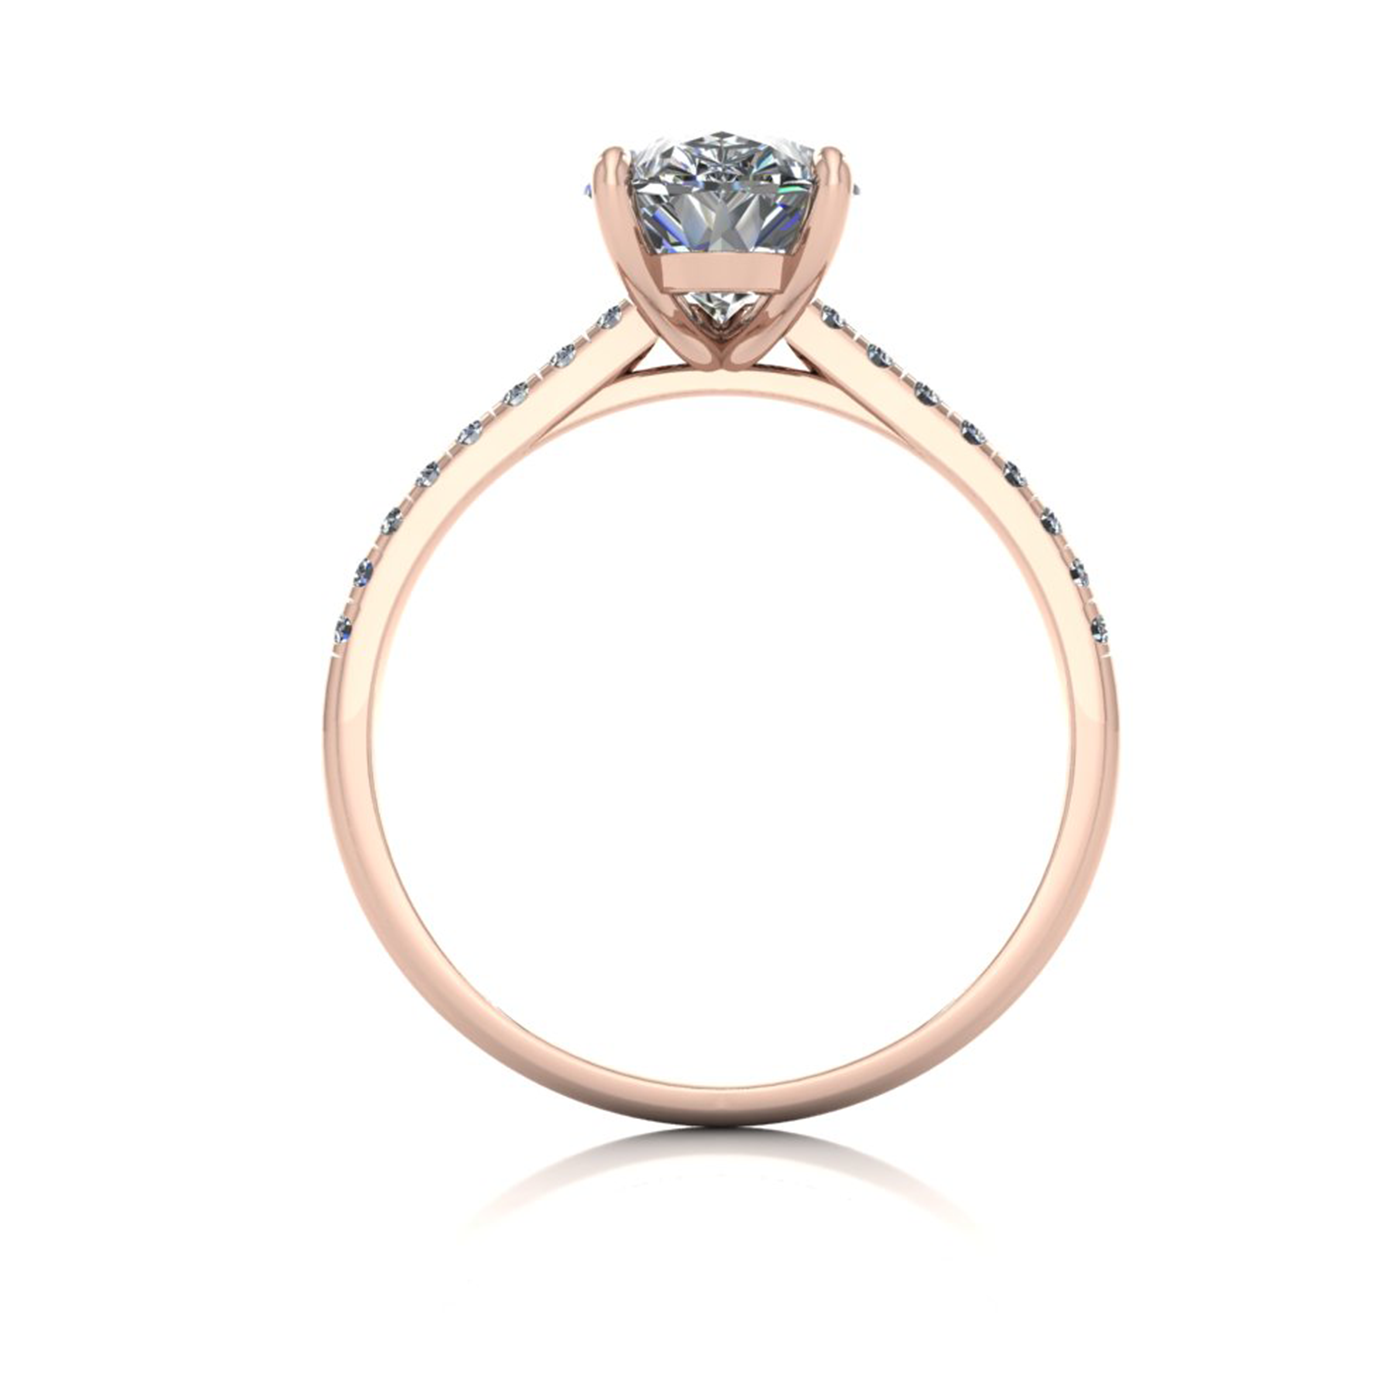 18k rose gold 2,00 ct 3 prongs pear diamond engagement ring with whisper thin pavÉ set band